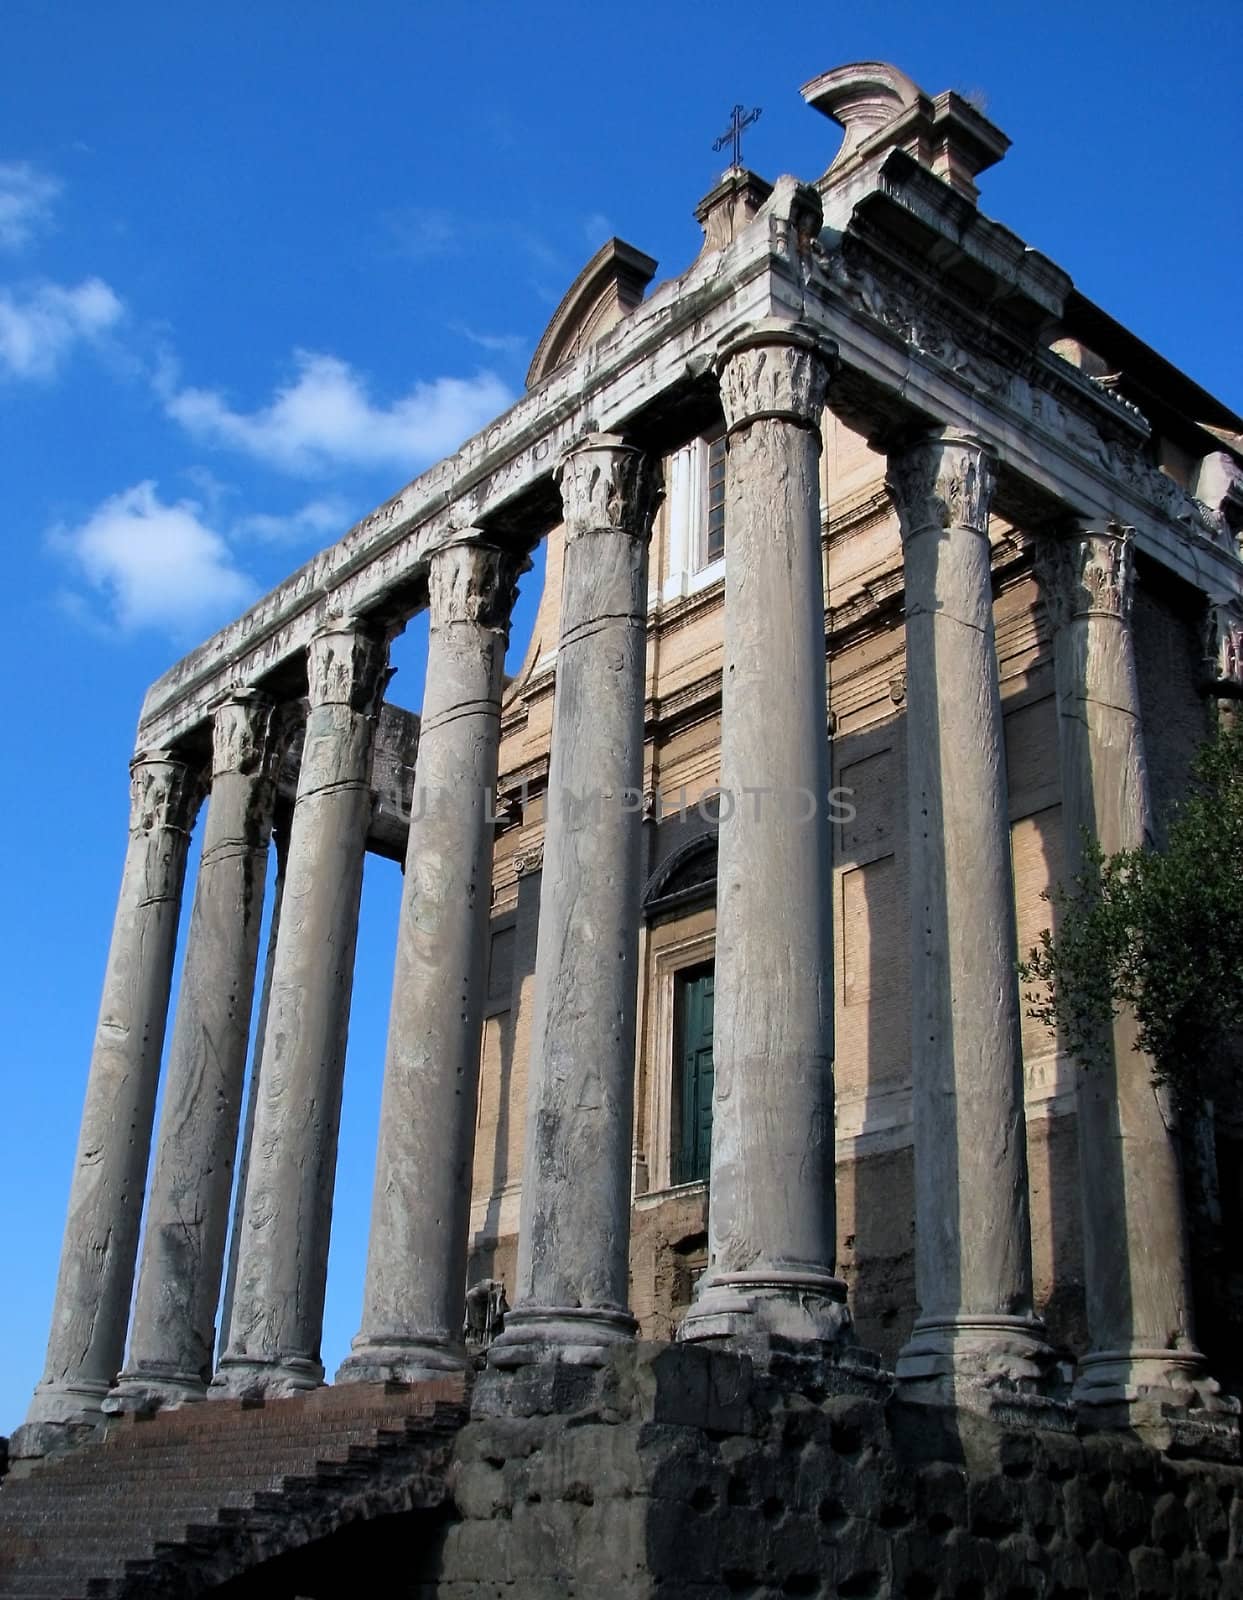 Located in the Roman Forum on the Via Sacra this temple was originally known as the Temple of Antoninus and Faustina. It was later converted to the Christian Church of San Lrenza in Miranda.